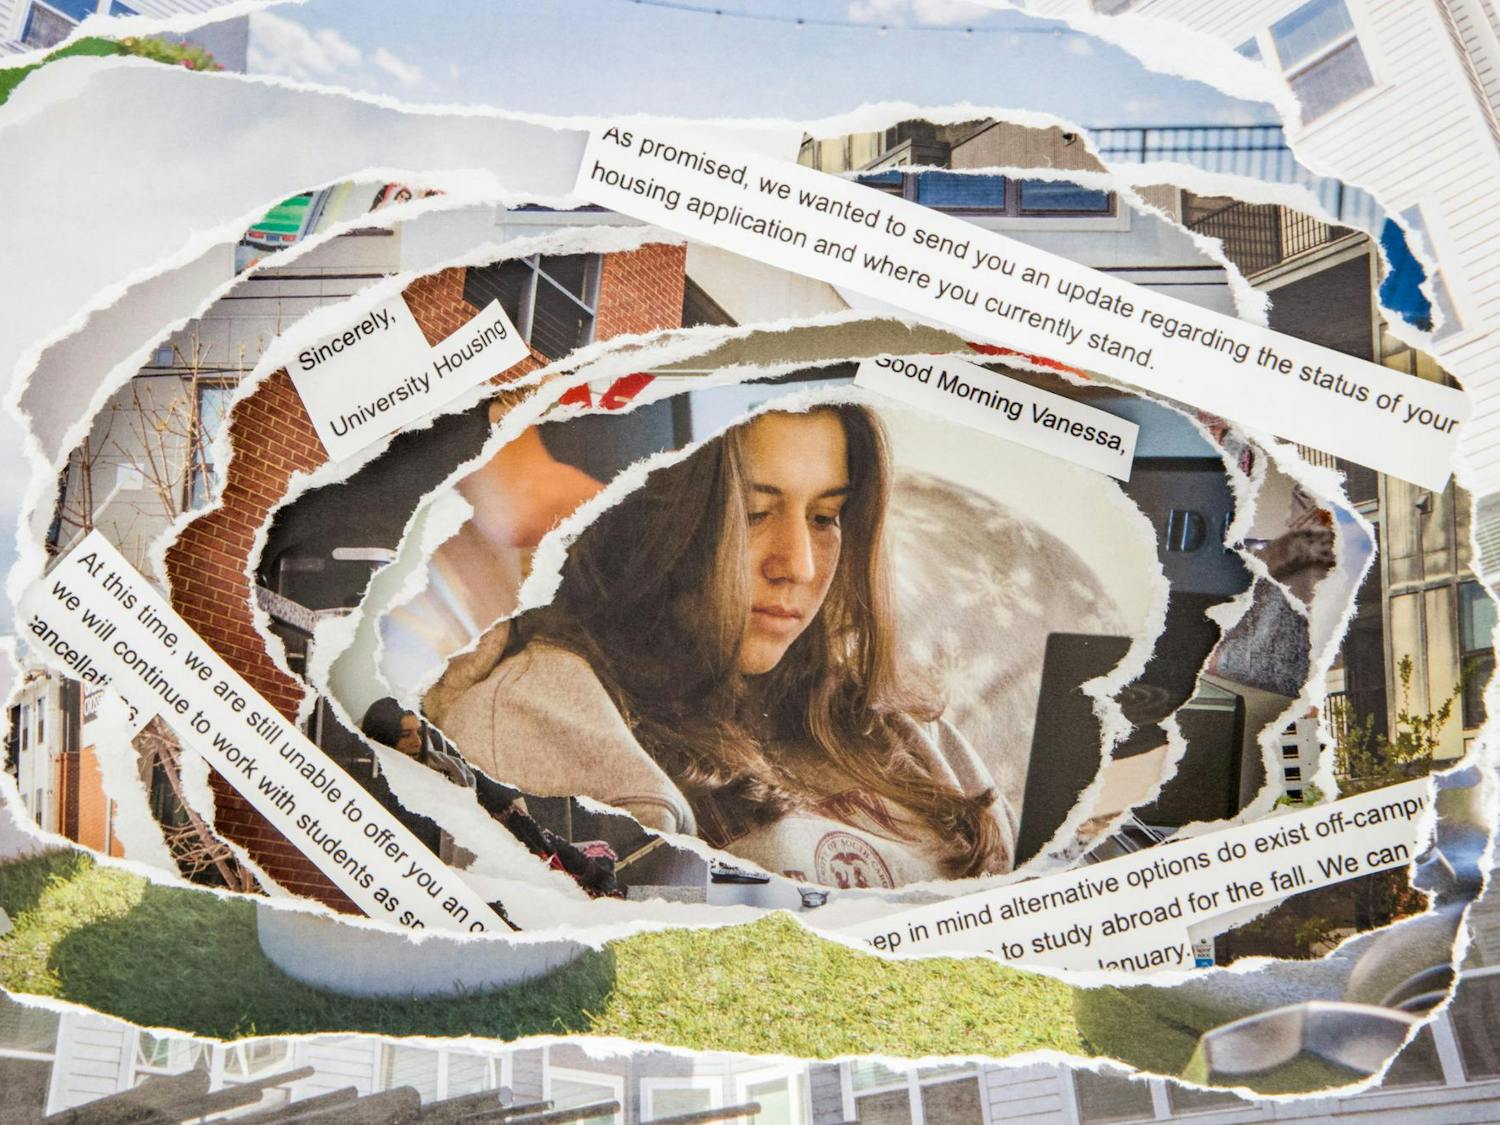 A compilation of photos from different ɫɫƵ housing complexes across Columbia, South Carolina throughout the spring 2024 semester. At the center sits Vanessa Alaimo, a resident of 650 Lincoln, surrounded by clips of emails sent to her by the University of South Carolina housing office.